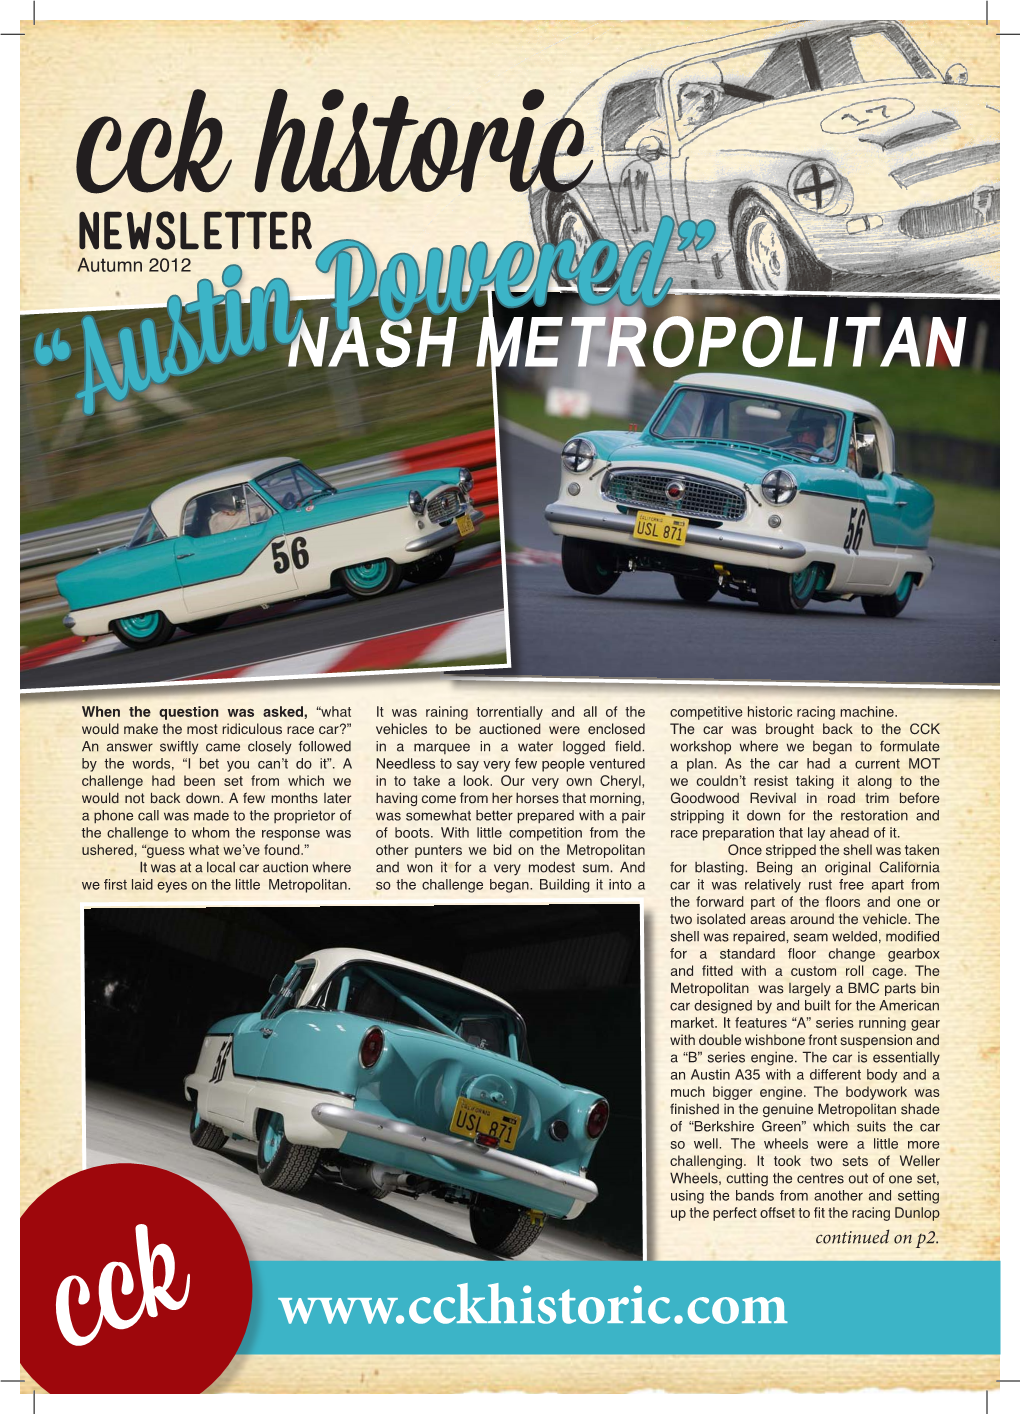 NASH METROPOLITAN “...Essentially an A35 Tyres Under the Over-Hanging Wheel Arches Without Limiting the Turning with a Different Body Circle